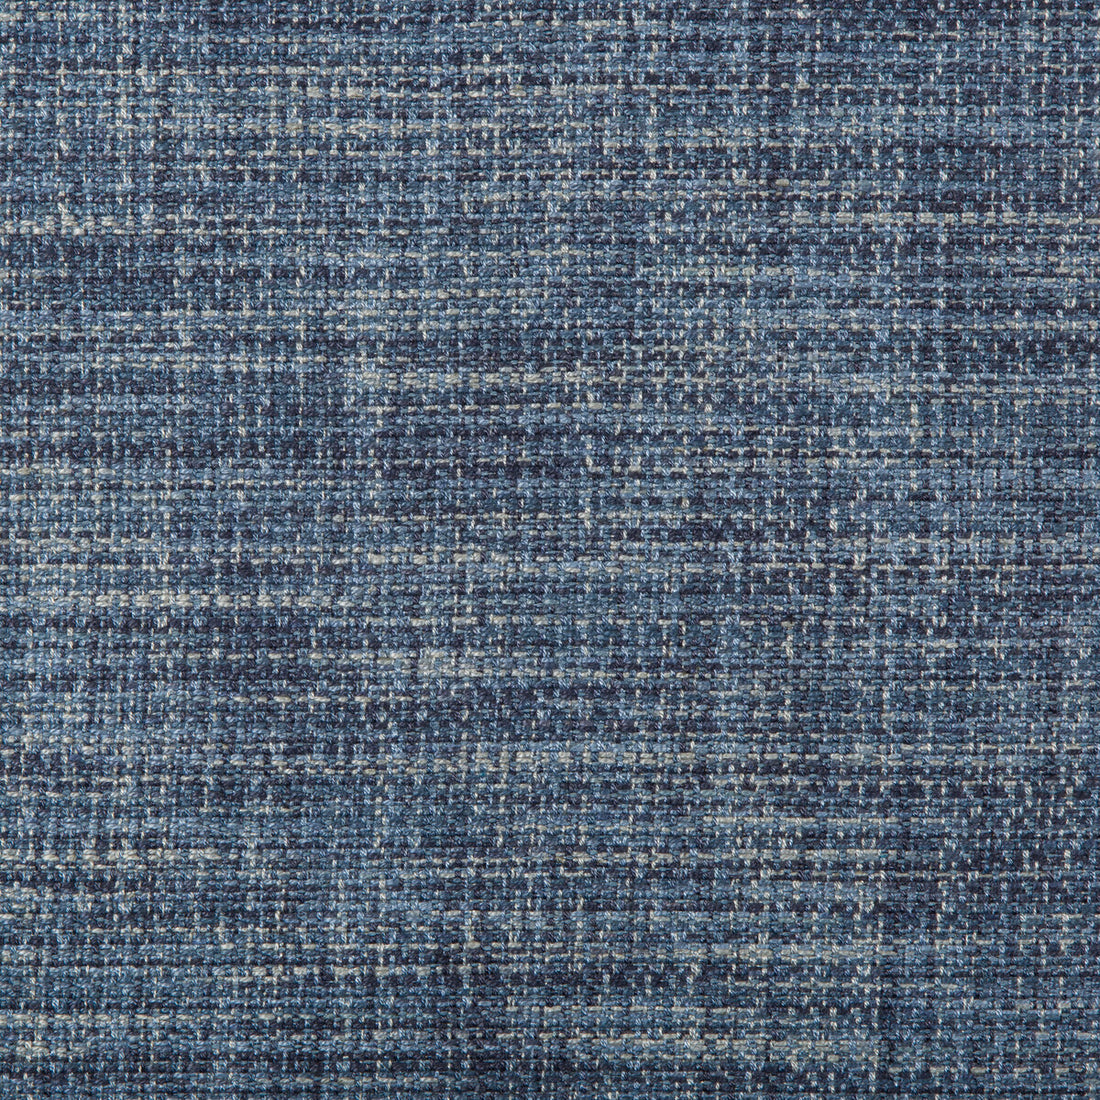 Ladera fabric in denim color - pattern 35523.5.0 - by Kravet Design in the Modern Colors-Sojourn collection